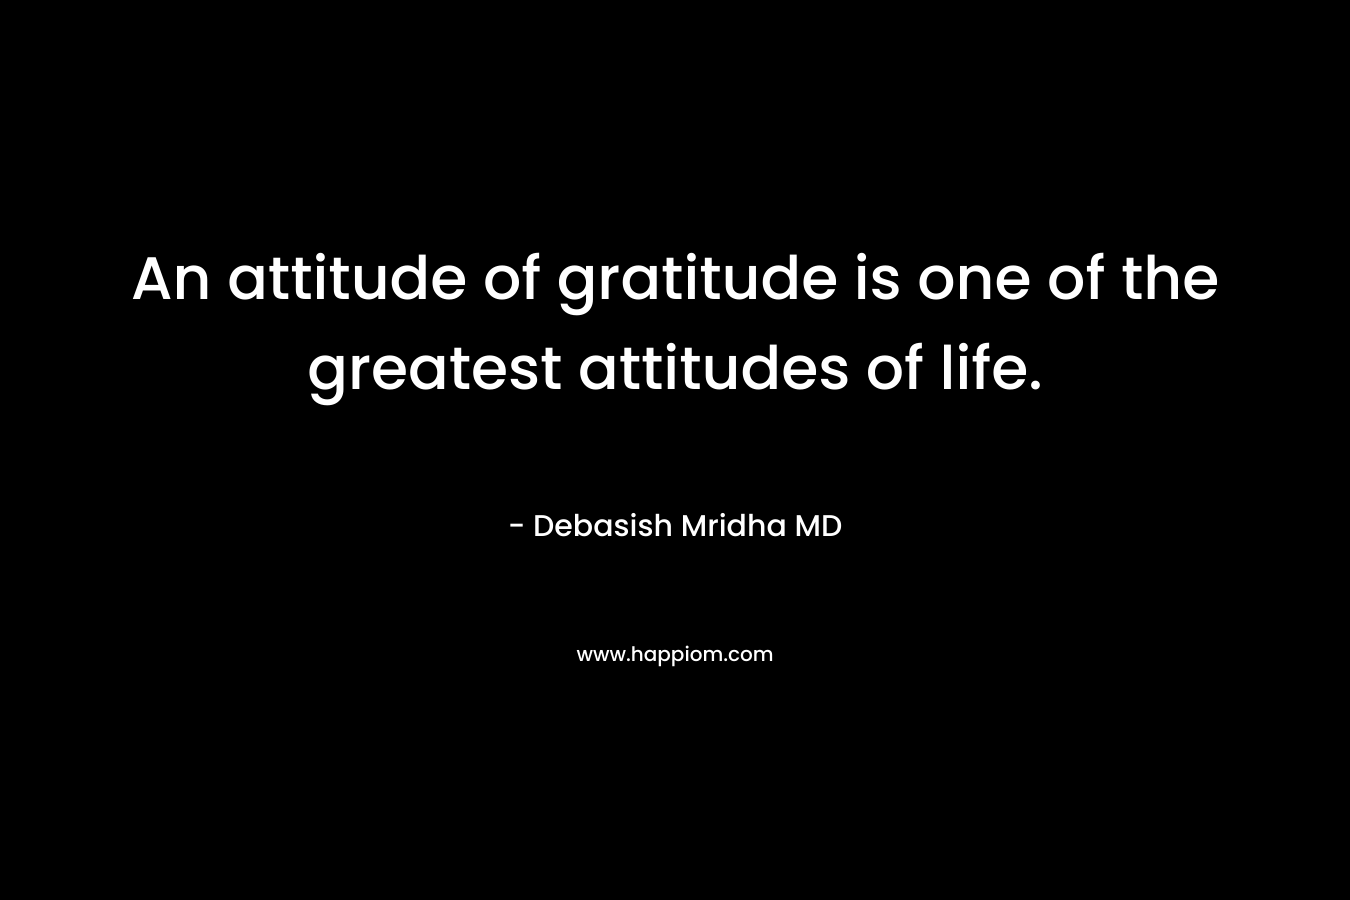 An attitude of gratitude is one of the greatest attitudes of life.